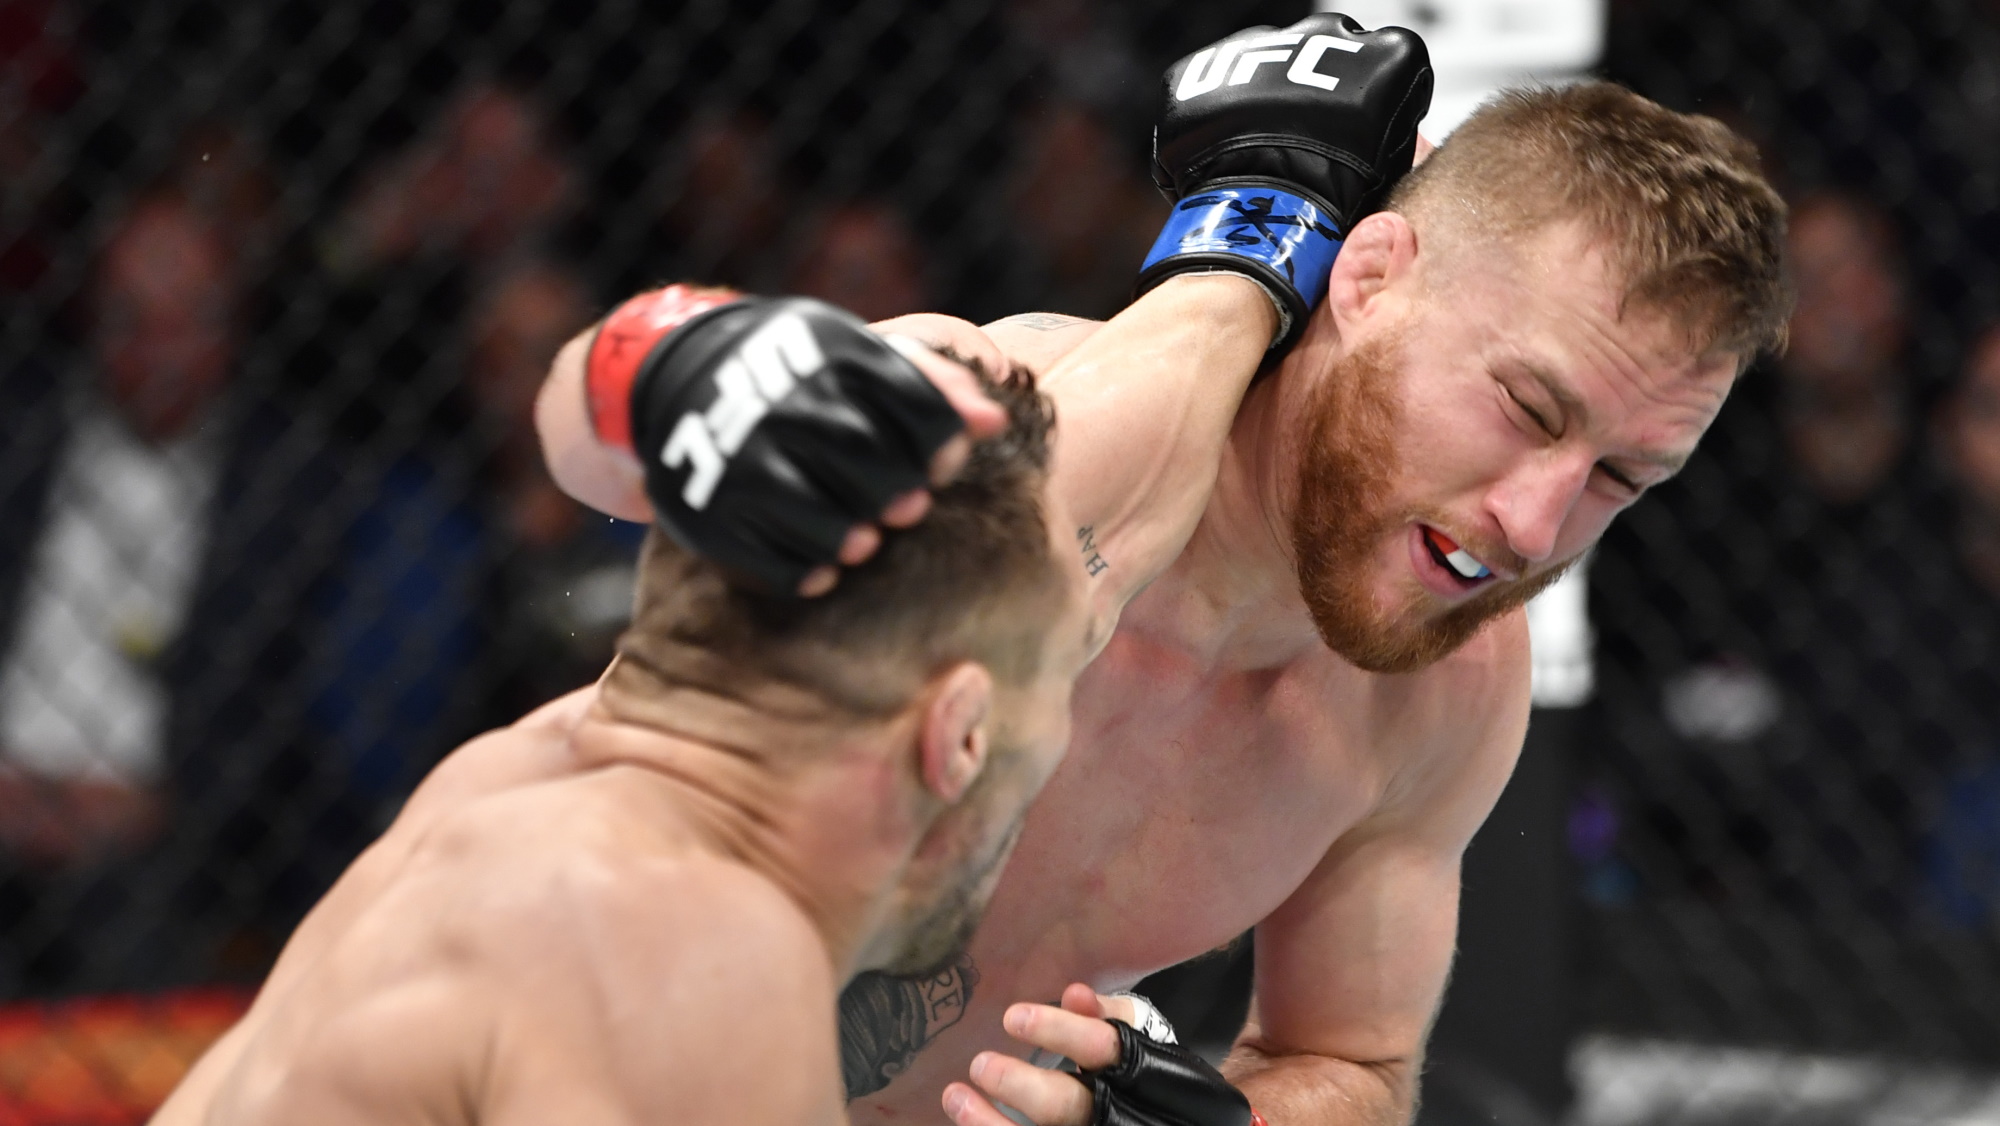 Justin Gaethje punching during a UFC bout